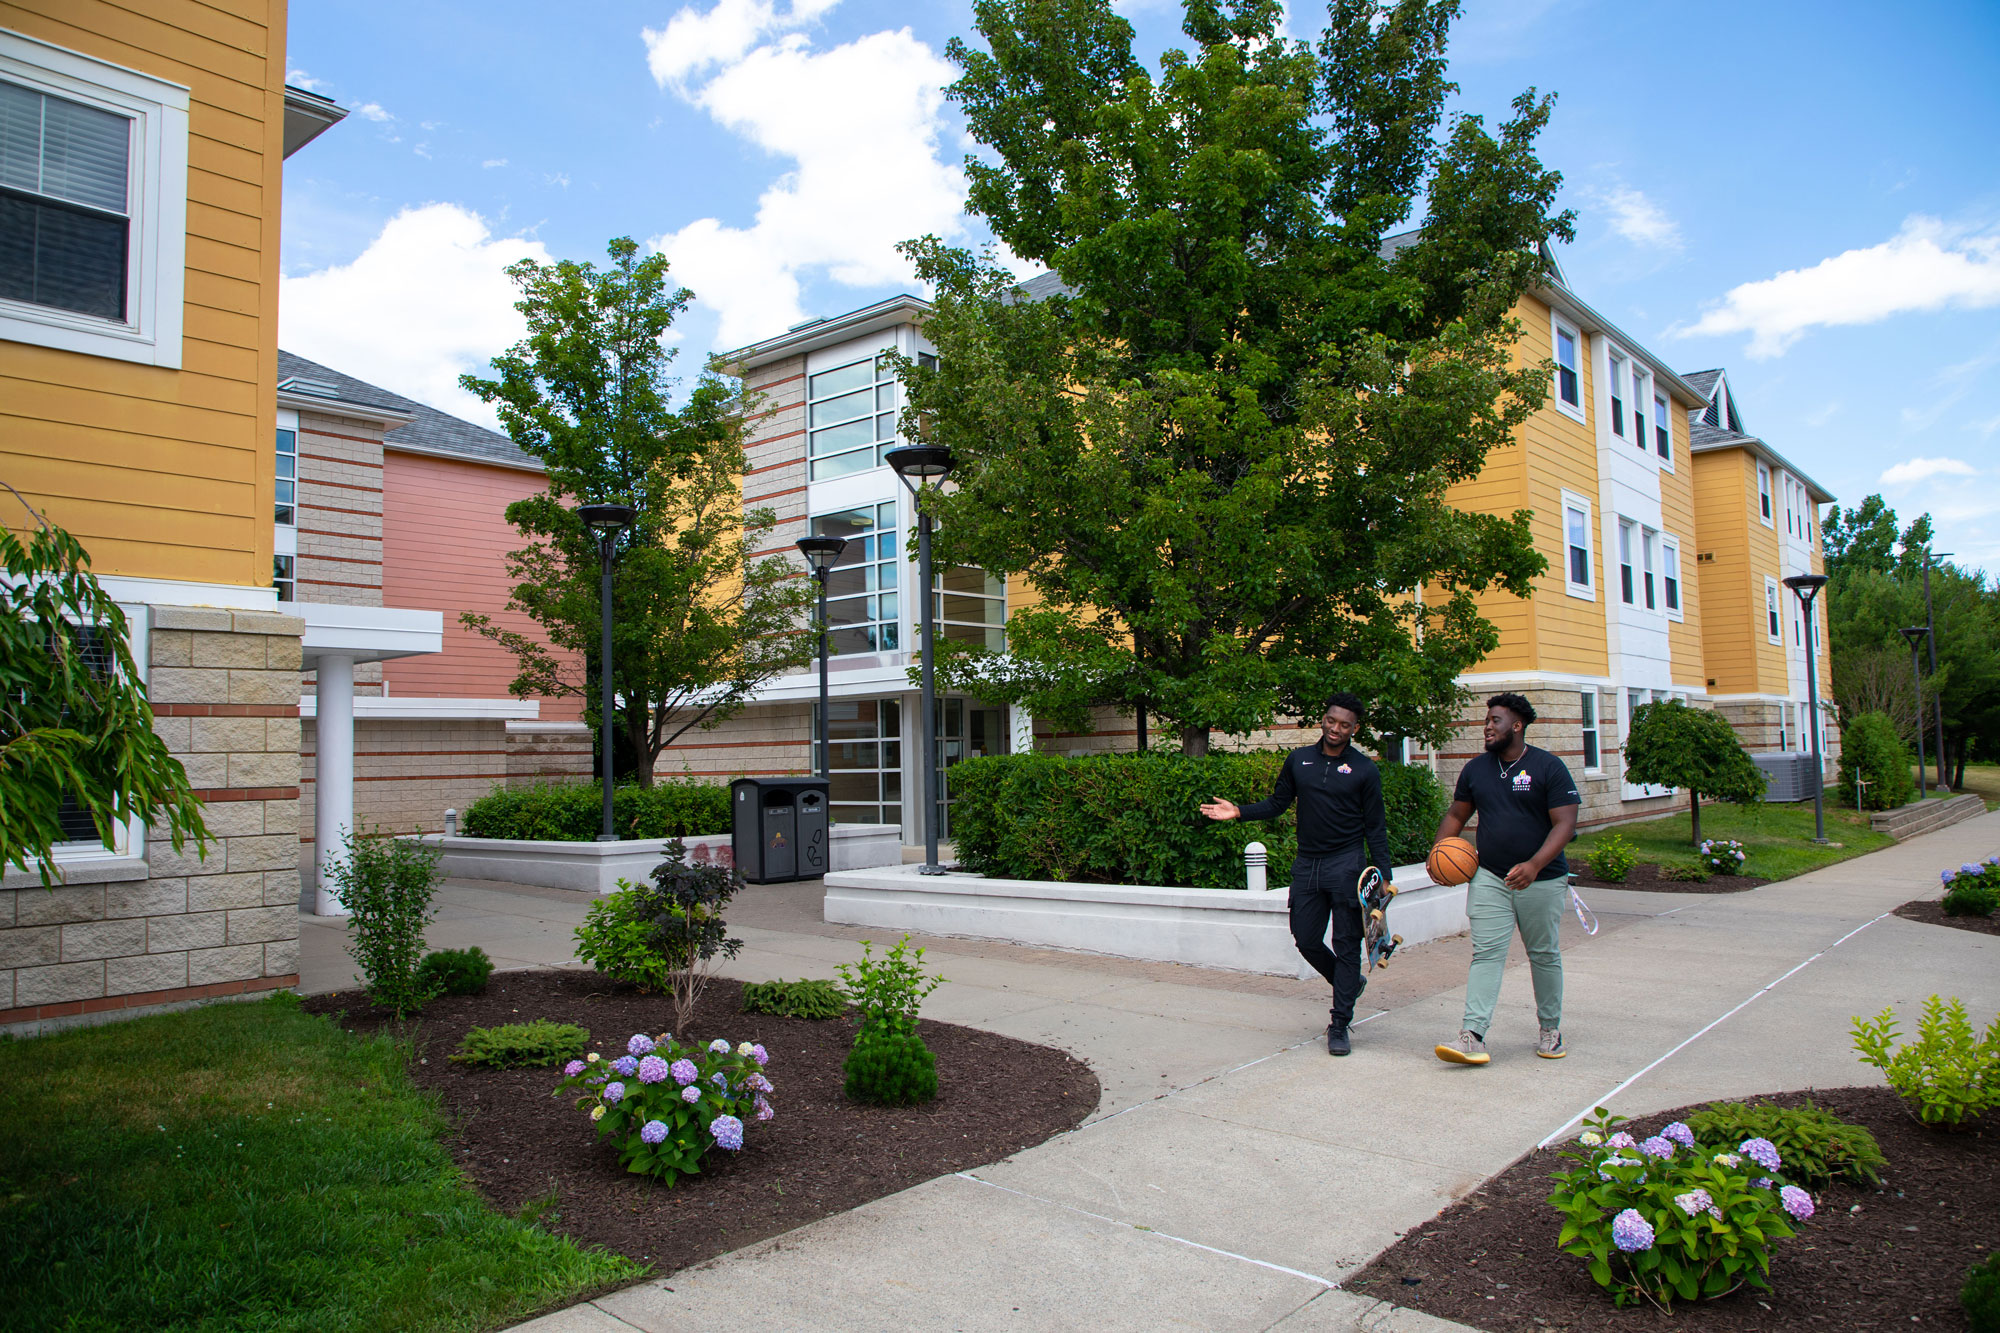 Two students with a basketball walk through Empire Commons, an apartment complex. The buildings are pink and yellow, with green trees and grass.